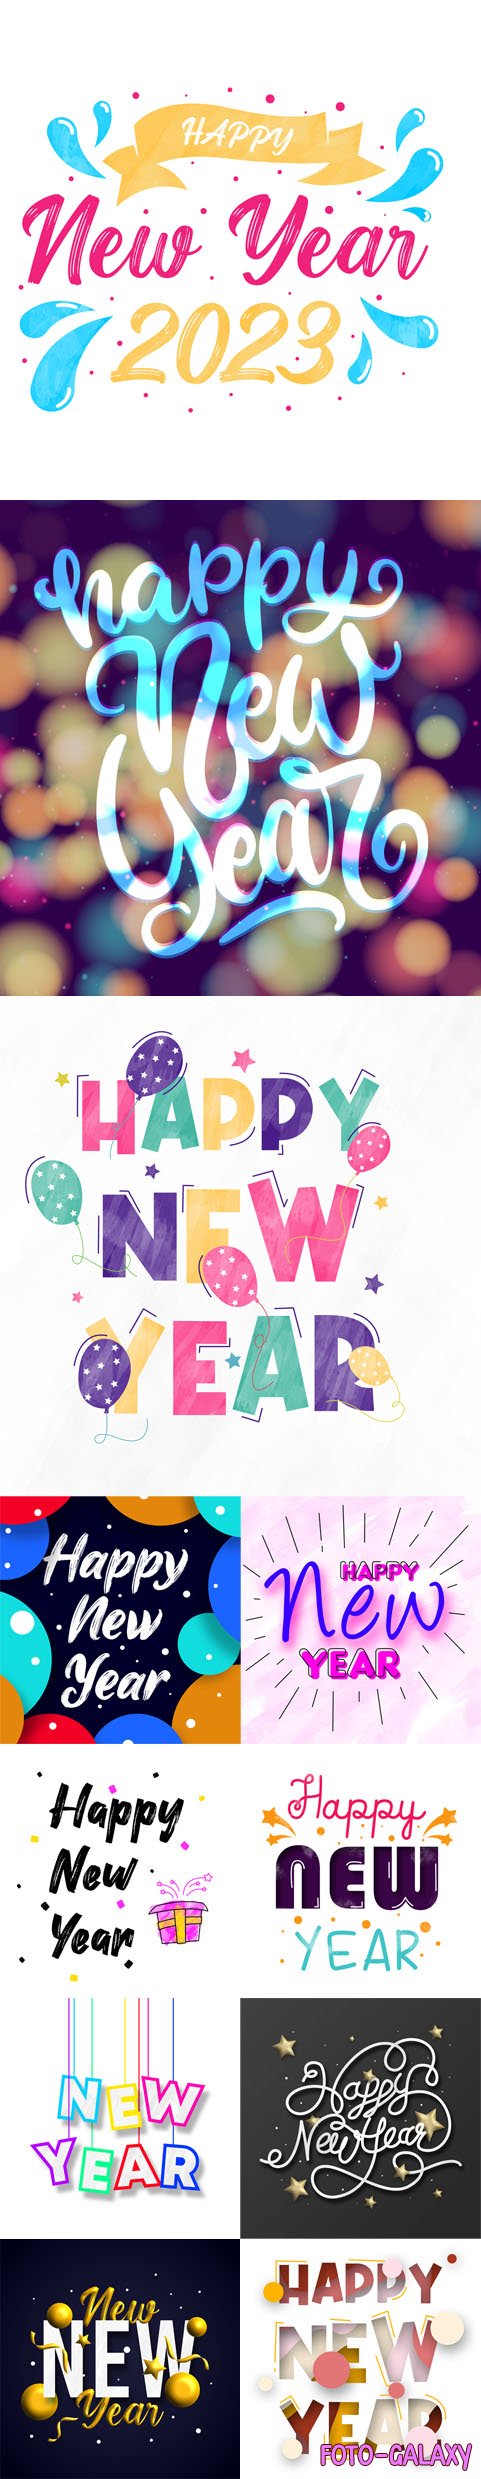 10+ Happy New Year Backgrounds - Vector Lettering Templates